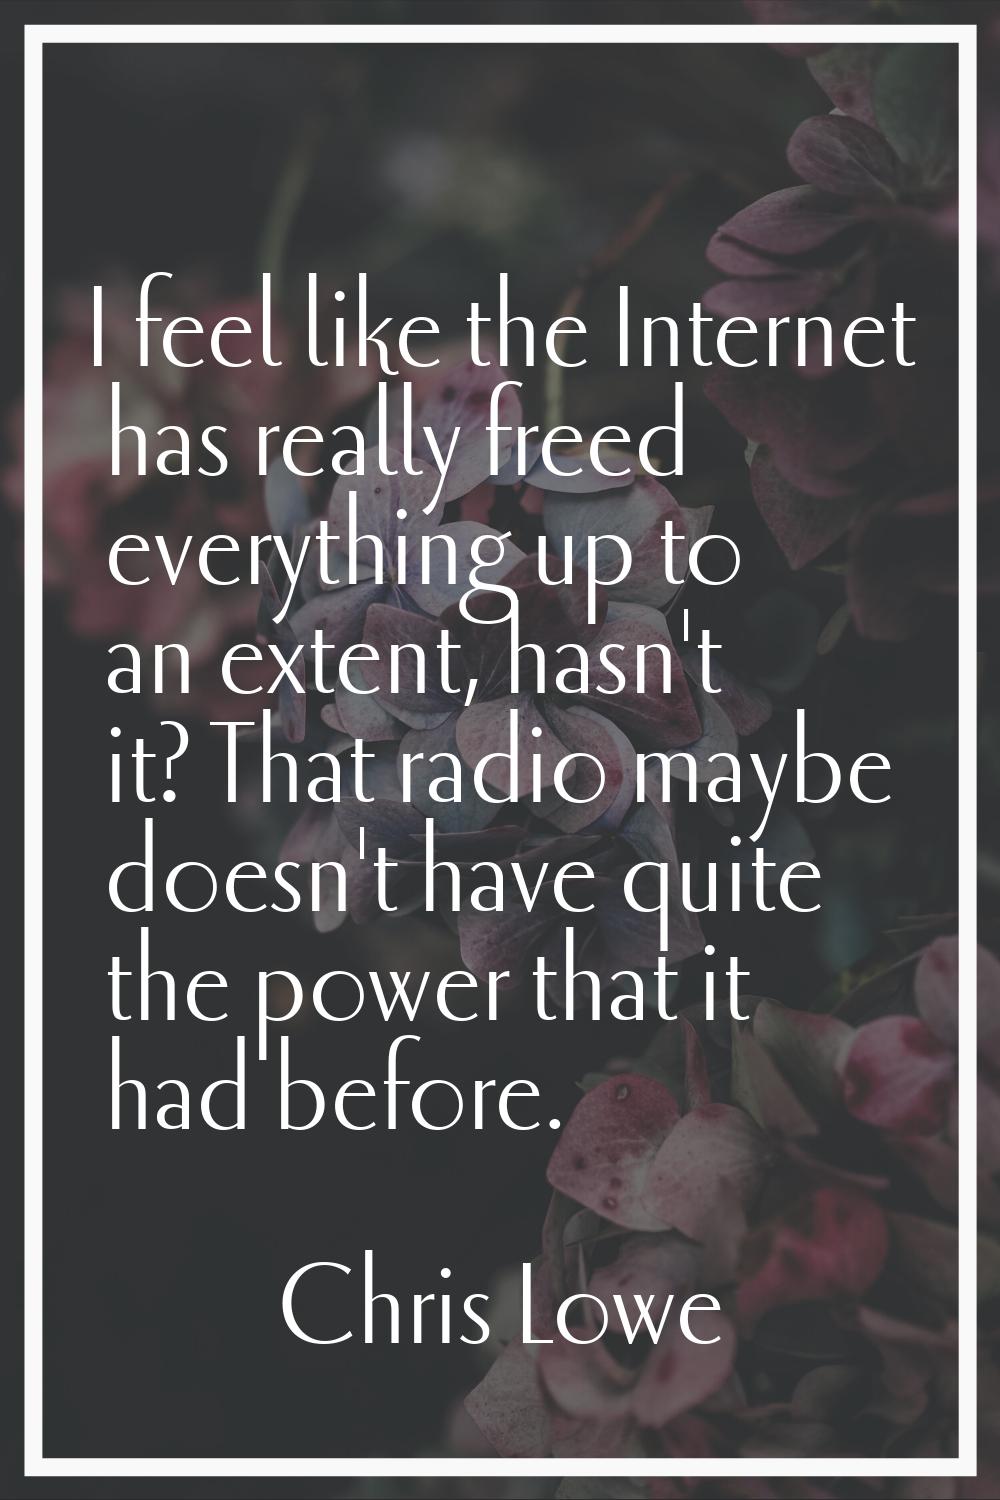 I feel like the Internet has really freed everything up to an extent, hasn't it? That radio maybe d